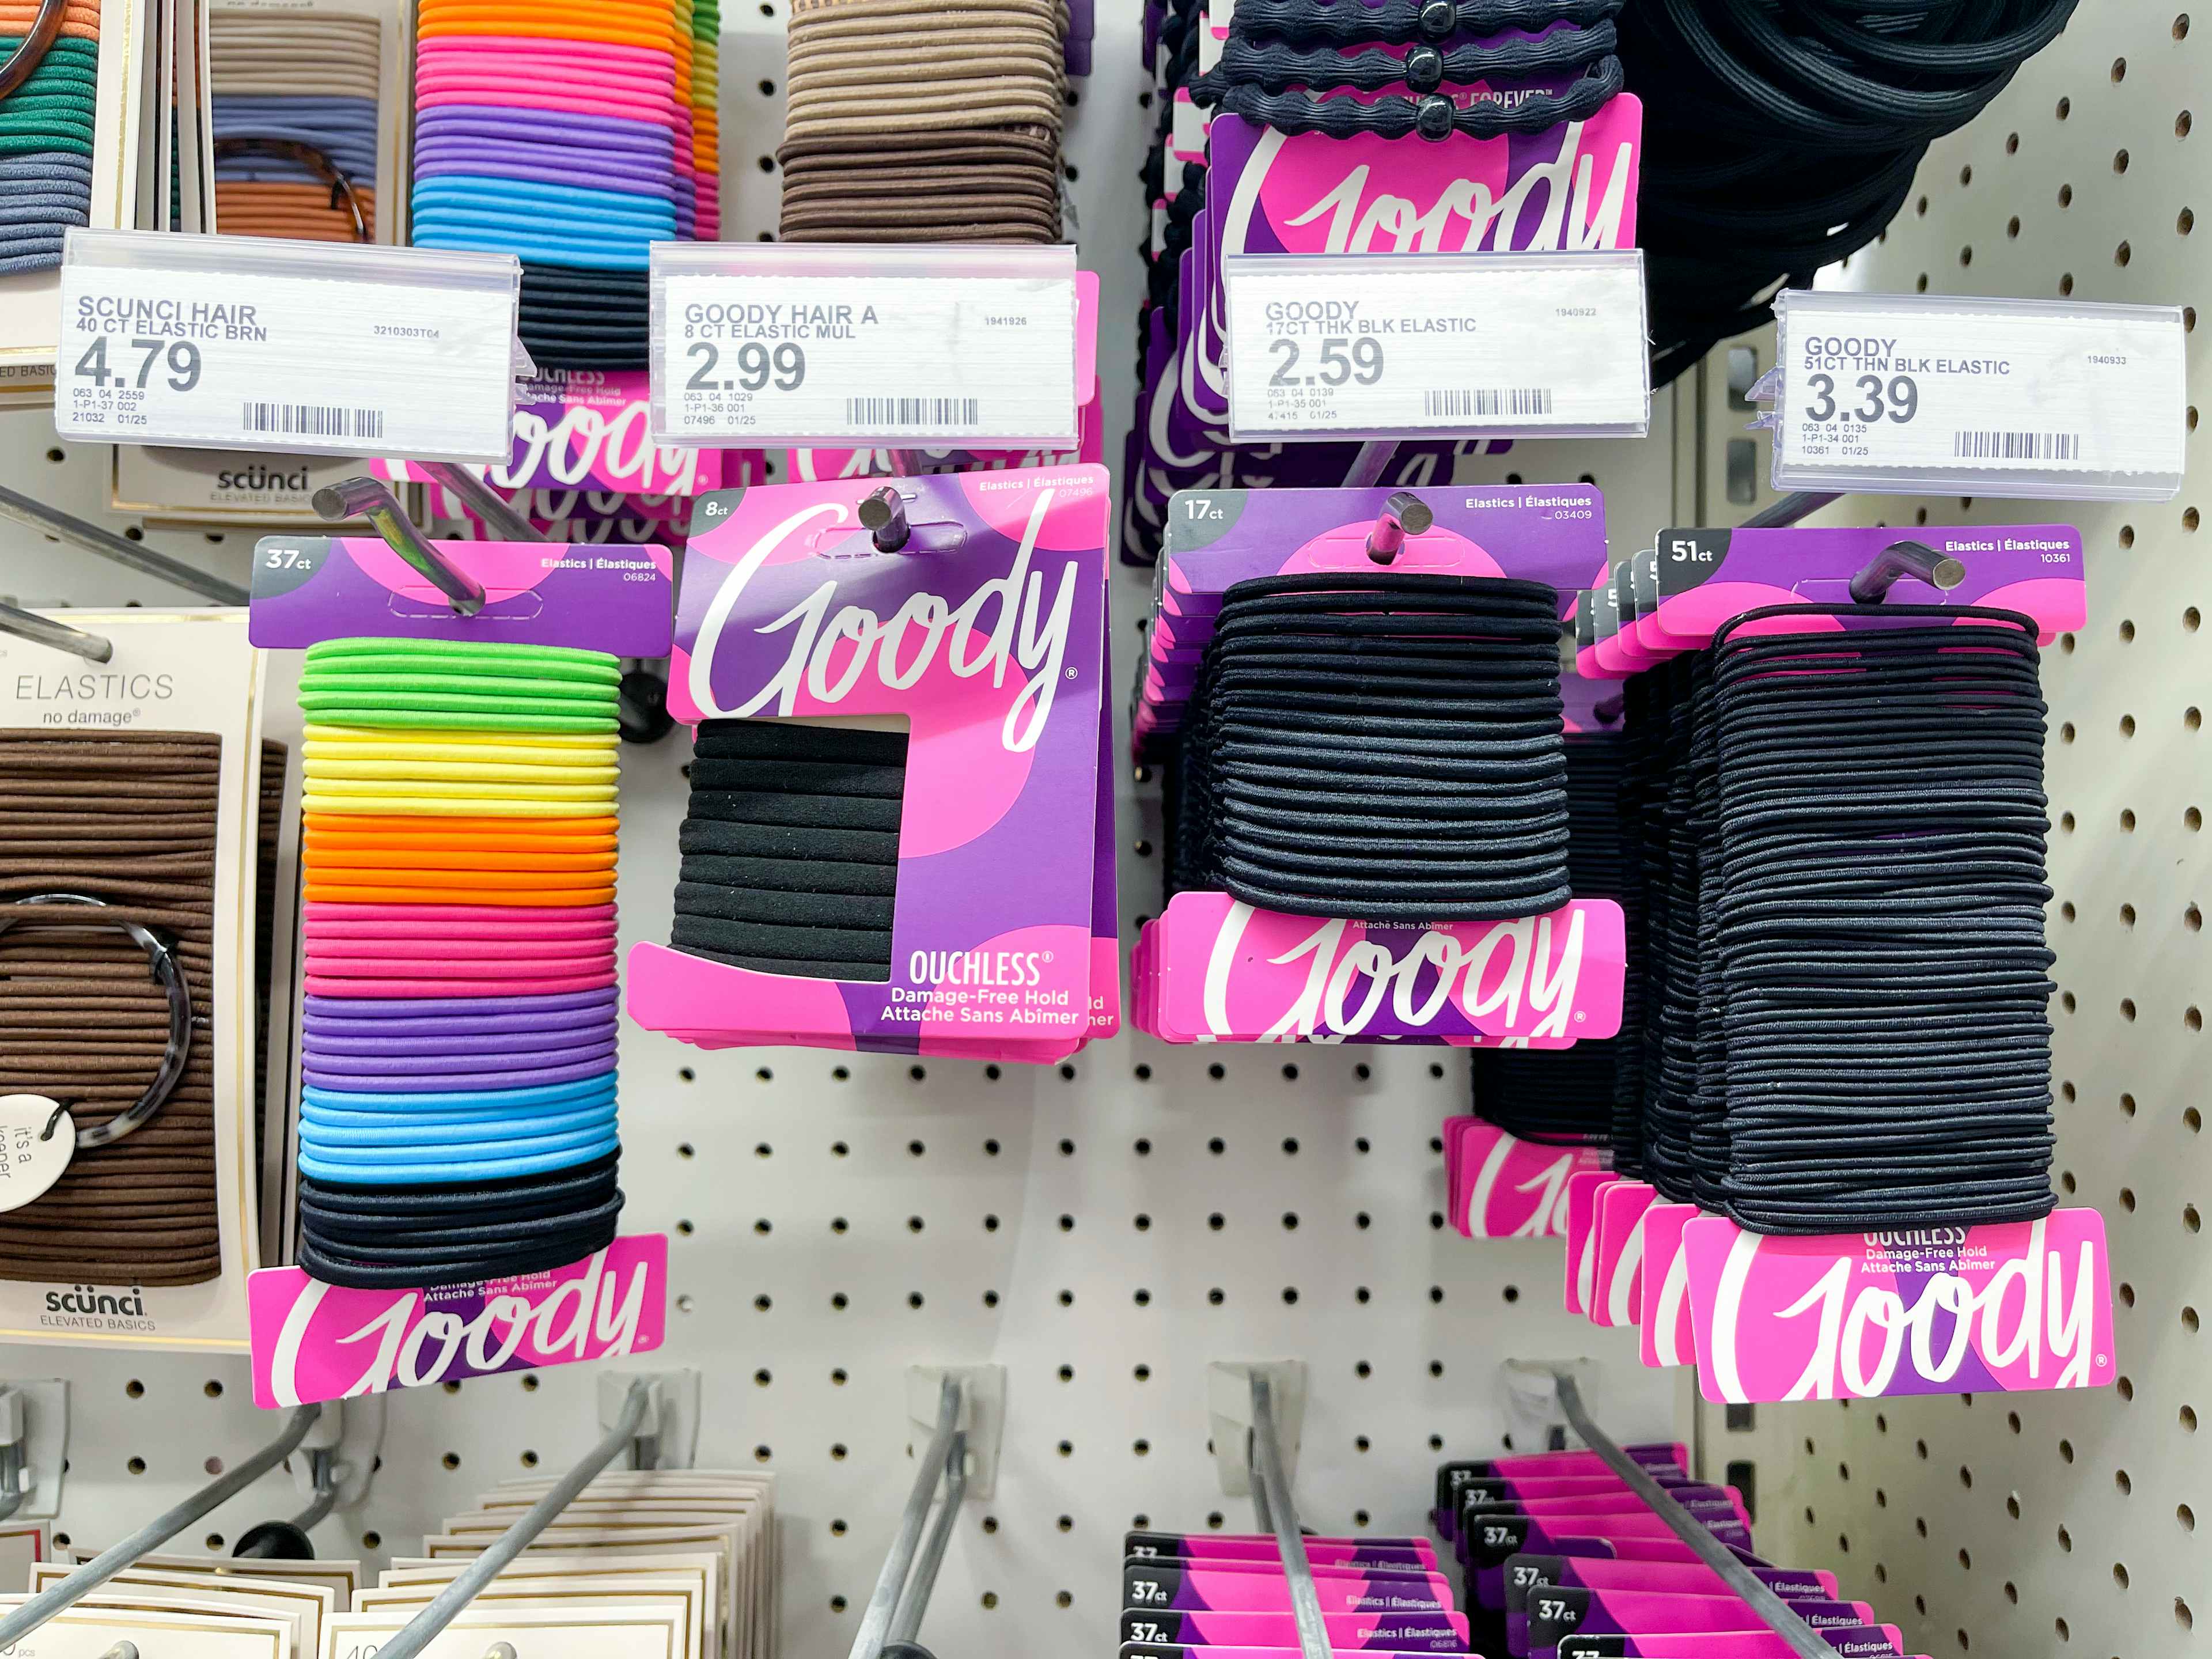 target-goody-hair-elastics-dont-buy-products-2021-20